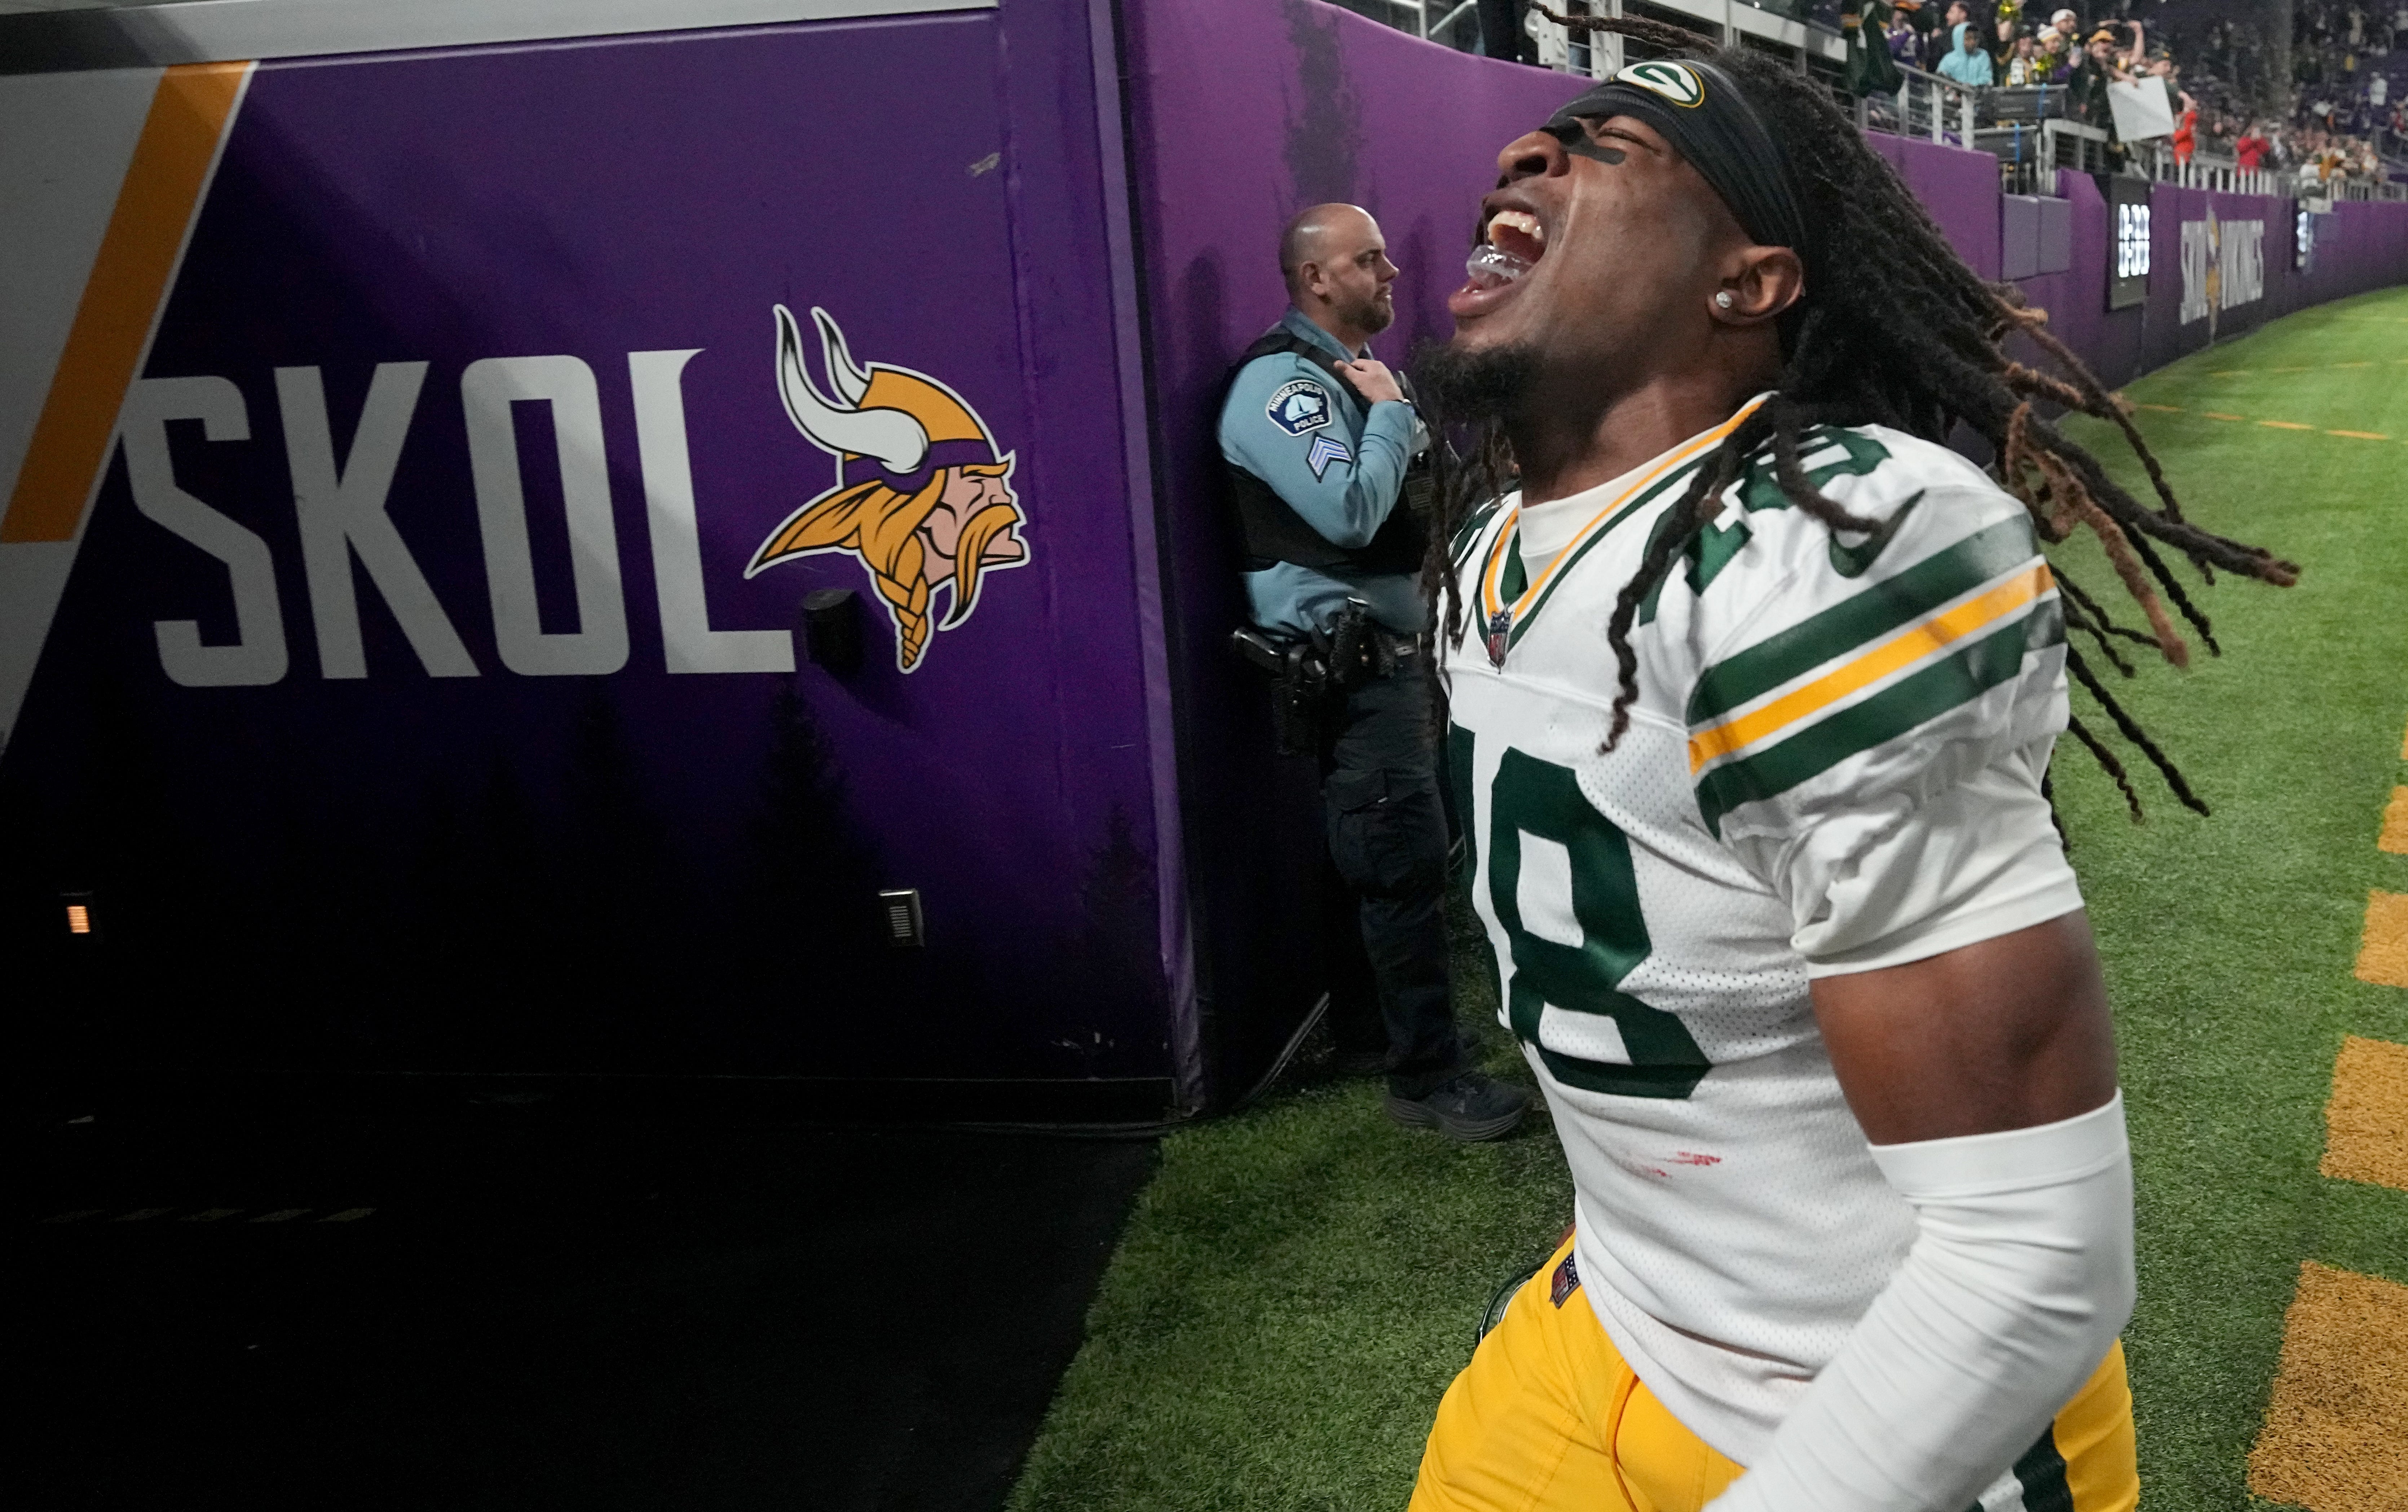 Green Bay Packers safety Benny Sapp III (48) celebrates his team’s win after their game Sunday, December 31, 2023 at U.S. Bank Stadium in Minneapolis, Minnesota. The Green Bay Packers beat the Minnesota Vikings 33-10.